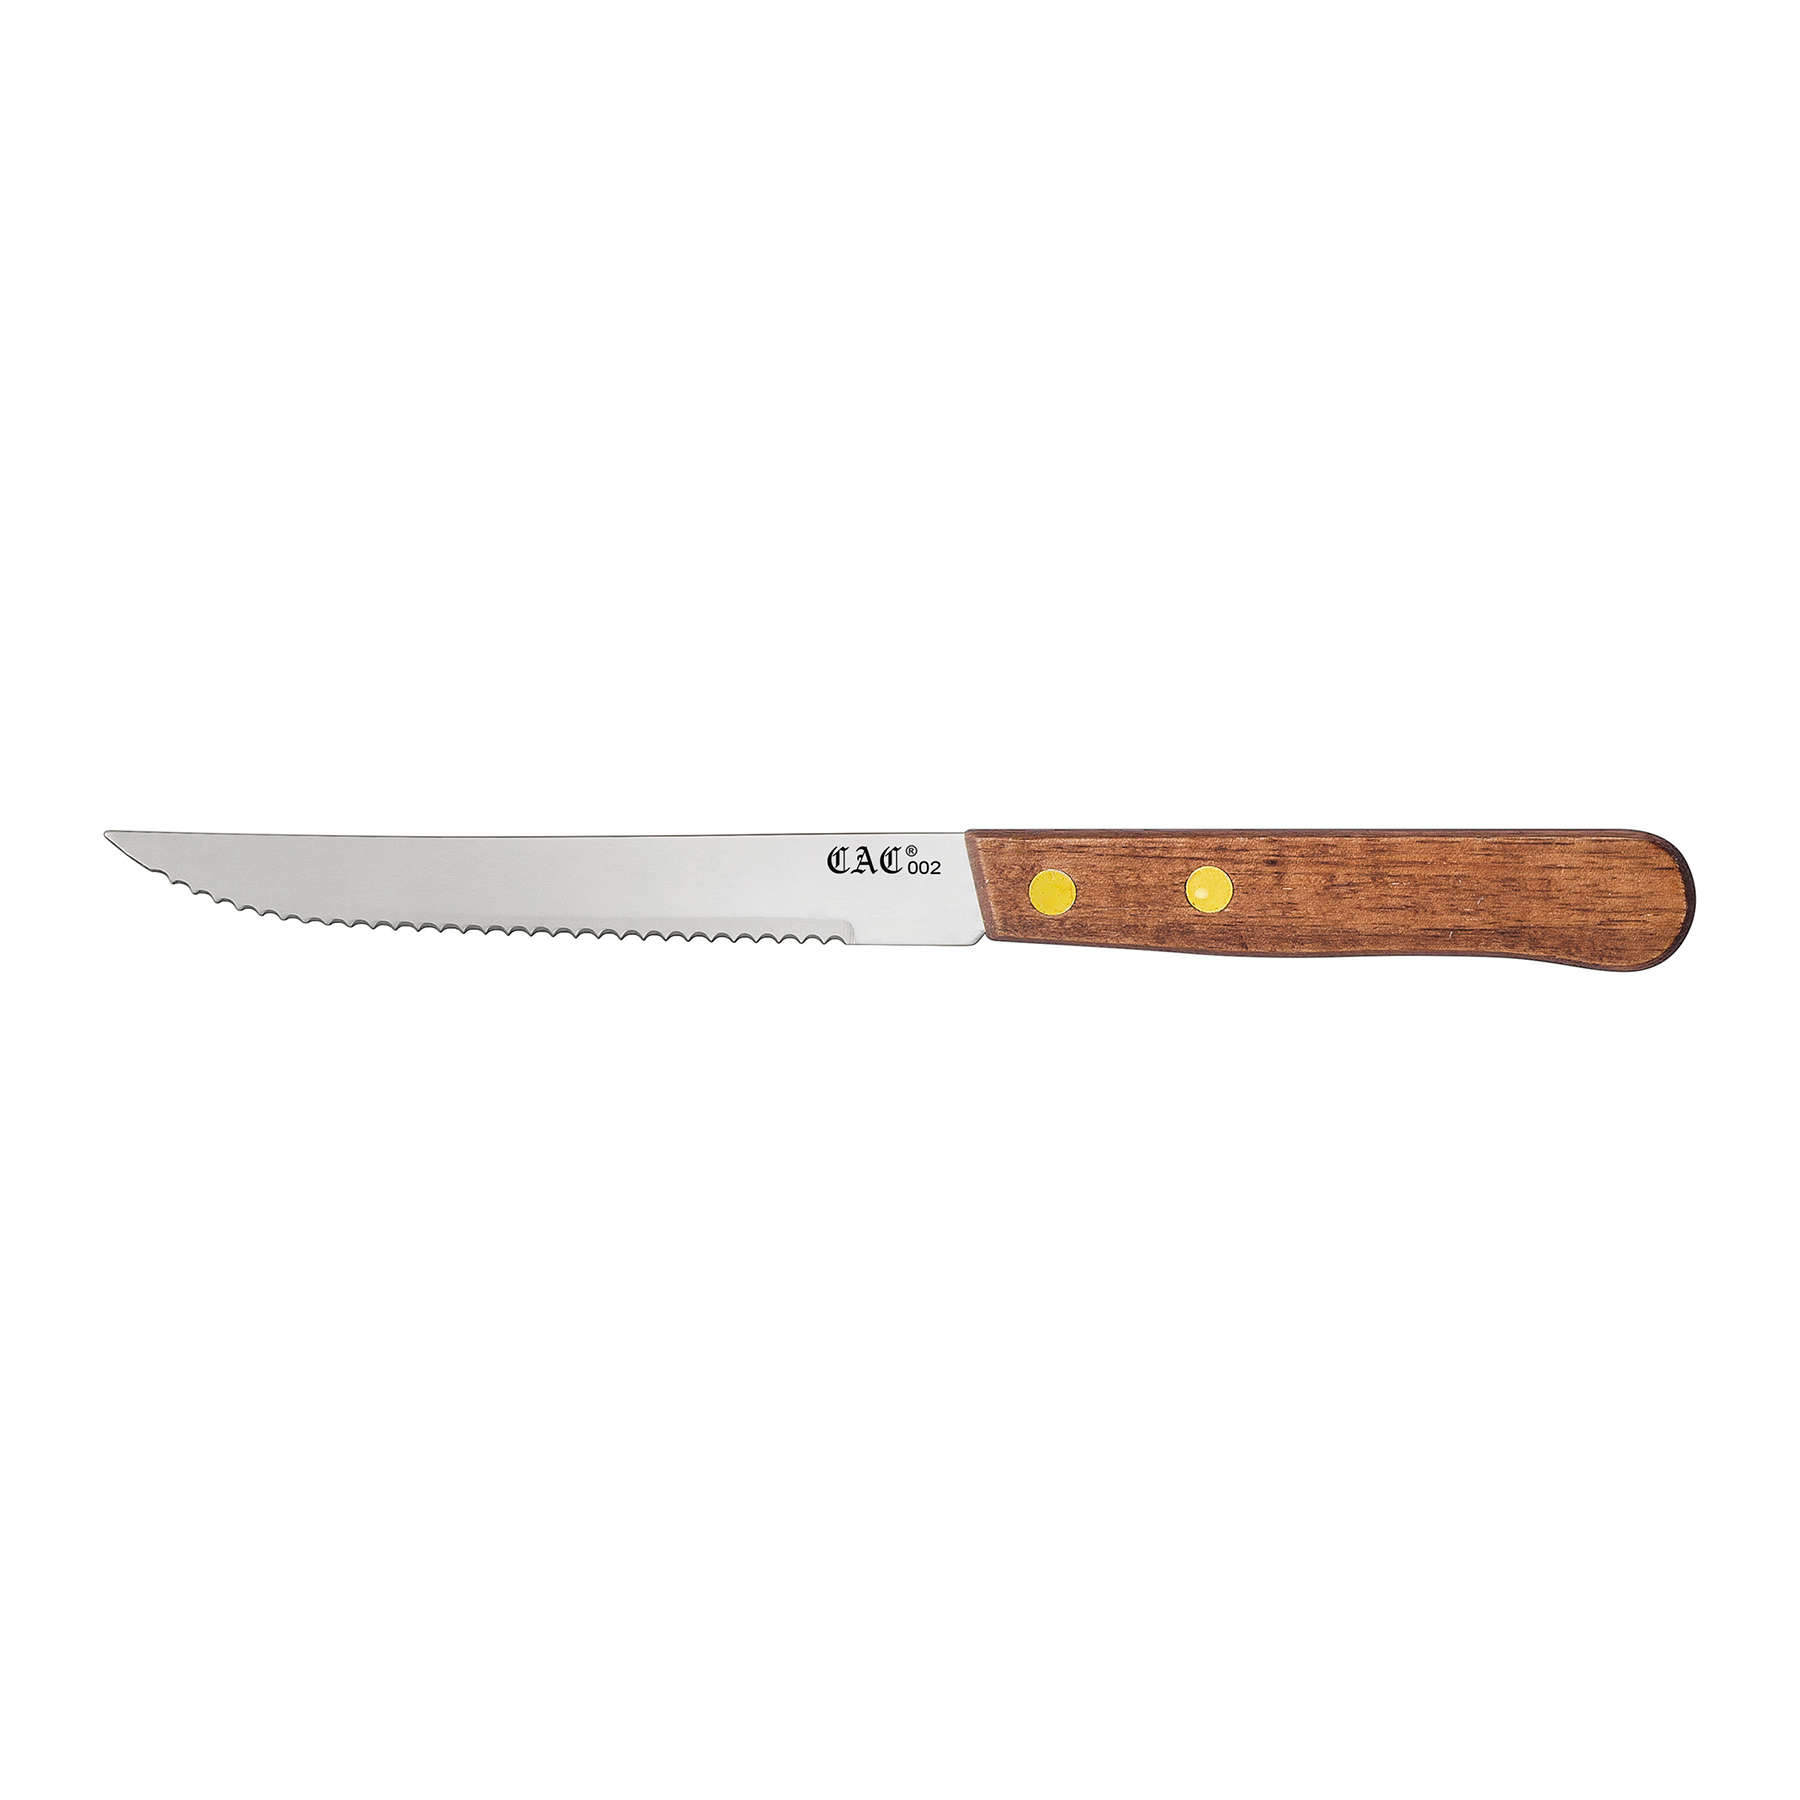 CAC China KWSK-46 Knife Steak with Pointed Tip, Wood Handle 4-3/4" - 1 dozen